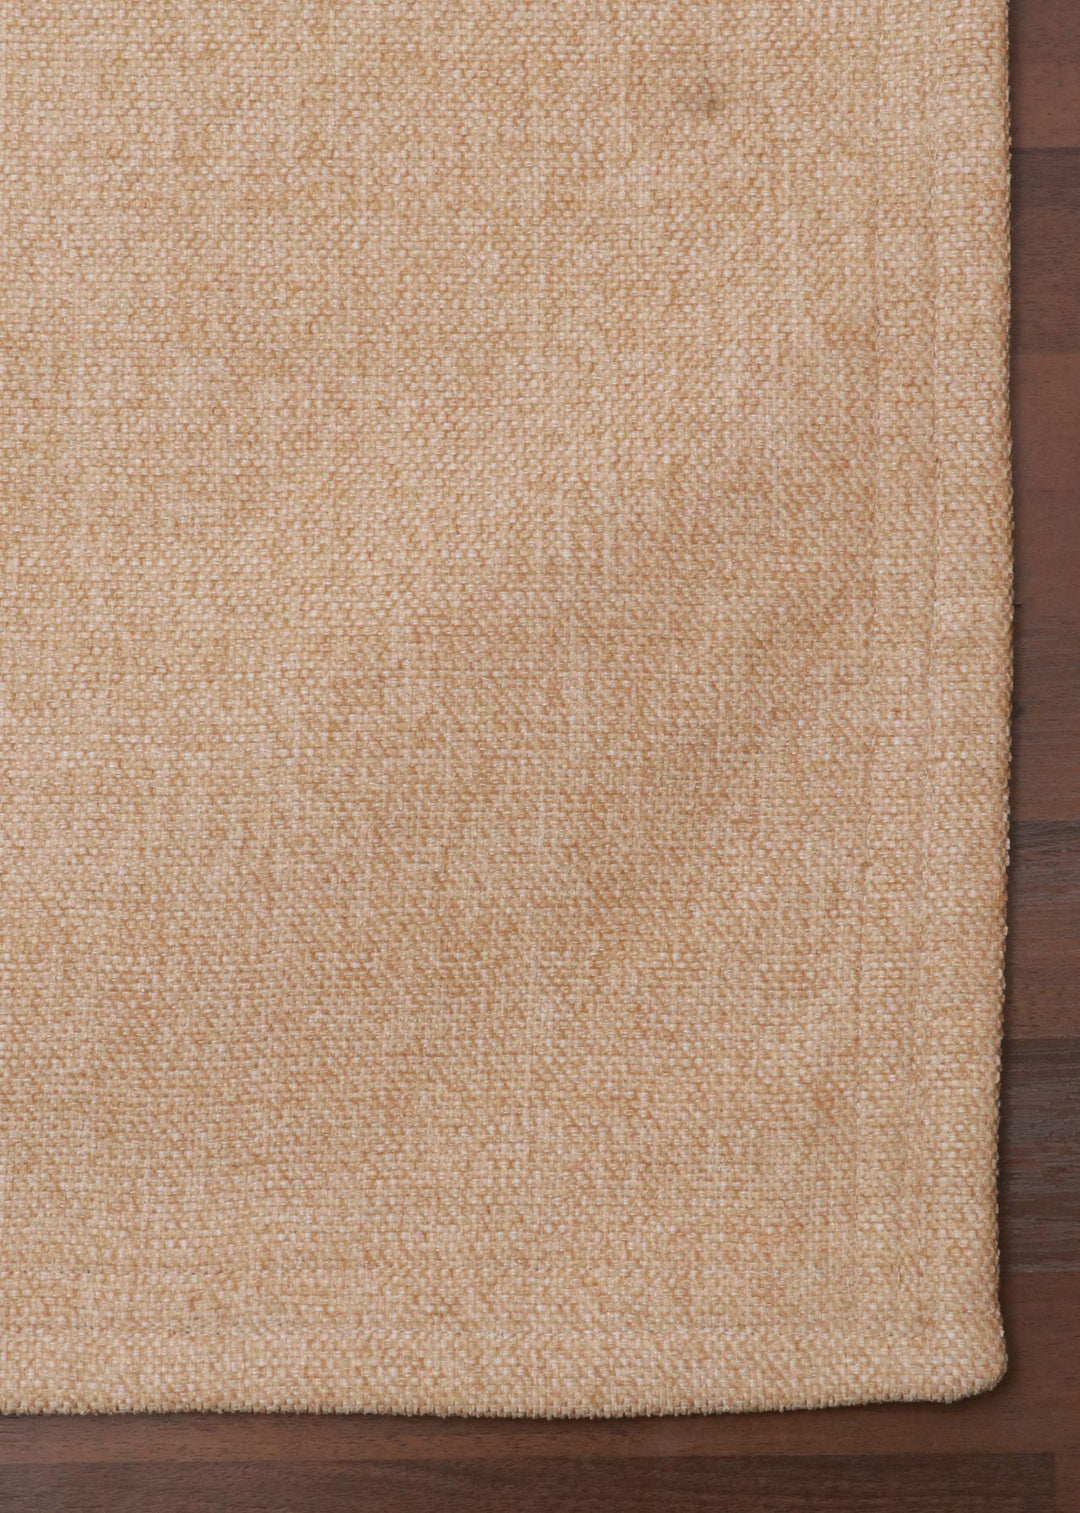 Light Brown Woven Fabric Rug - Indoor Use